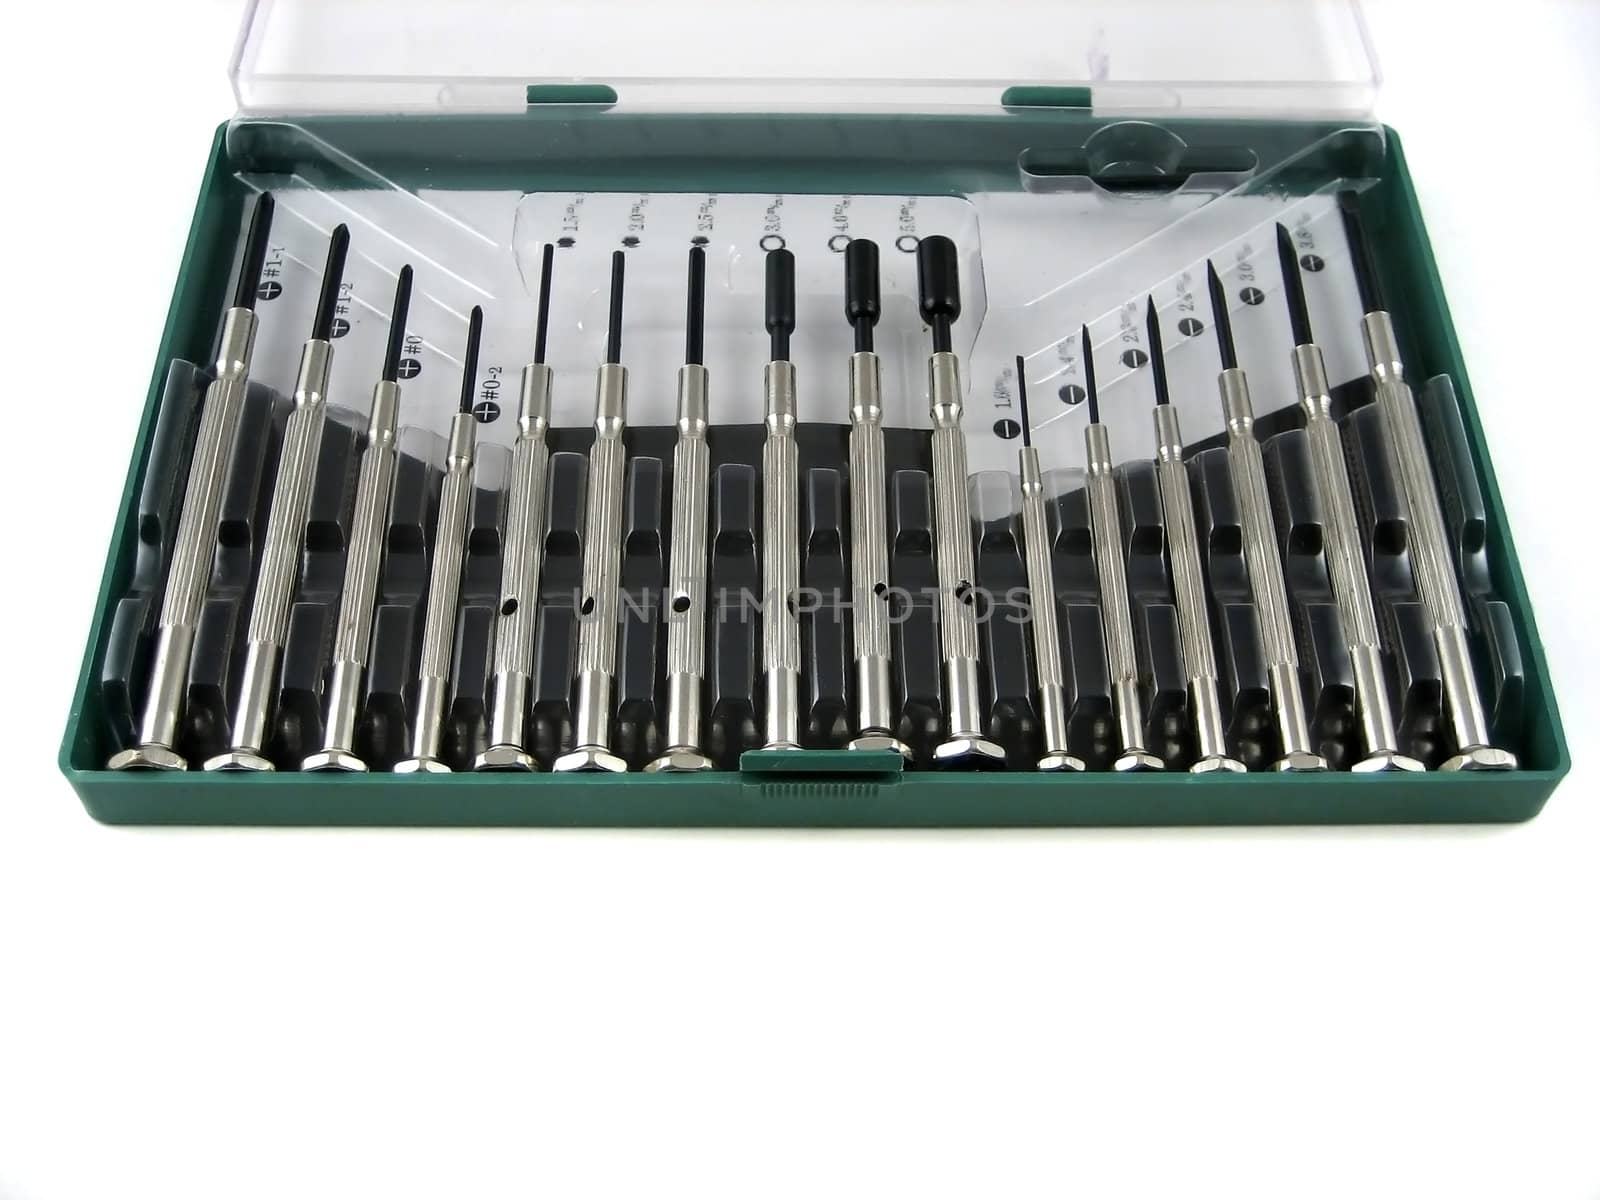 Pictures of small screwdrivers used for precision work